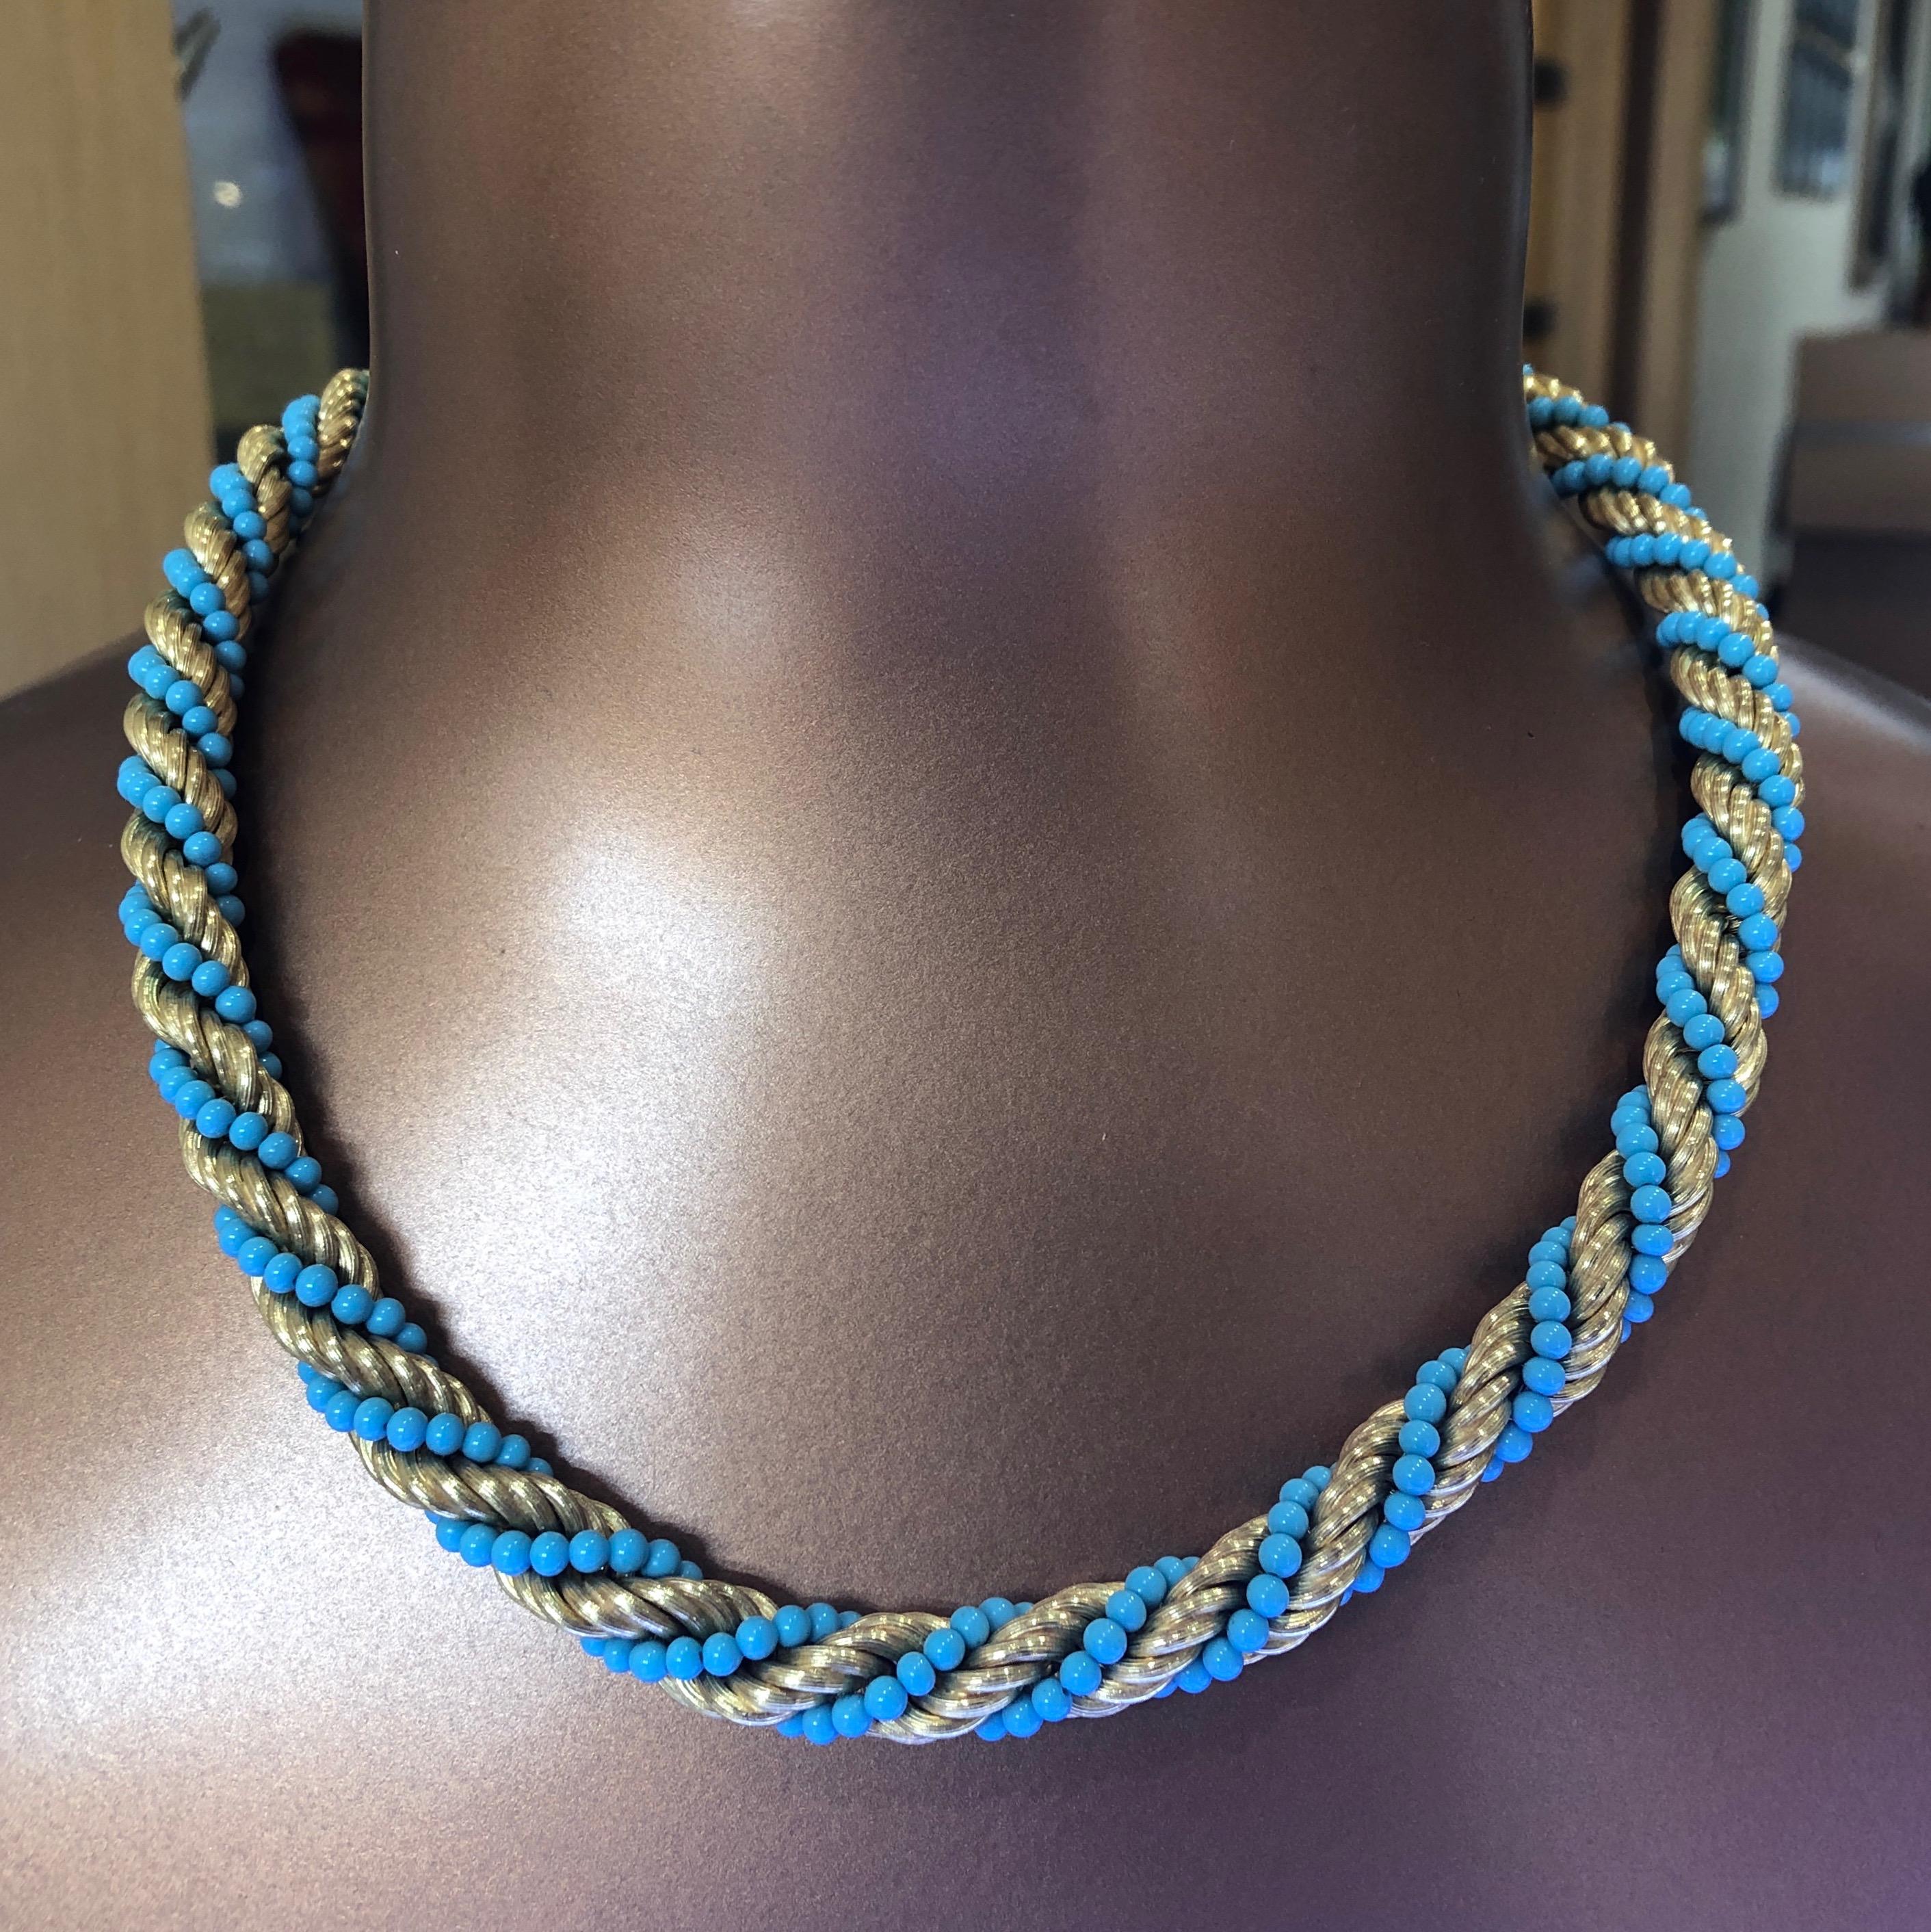 This retro estate necklace features sleeping beauty Turquoise round beads elegantly woven and twisted in solid 18 karat yellow gold ribbed chain. The necklace measures 19